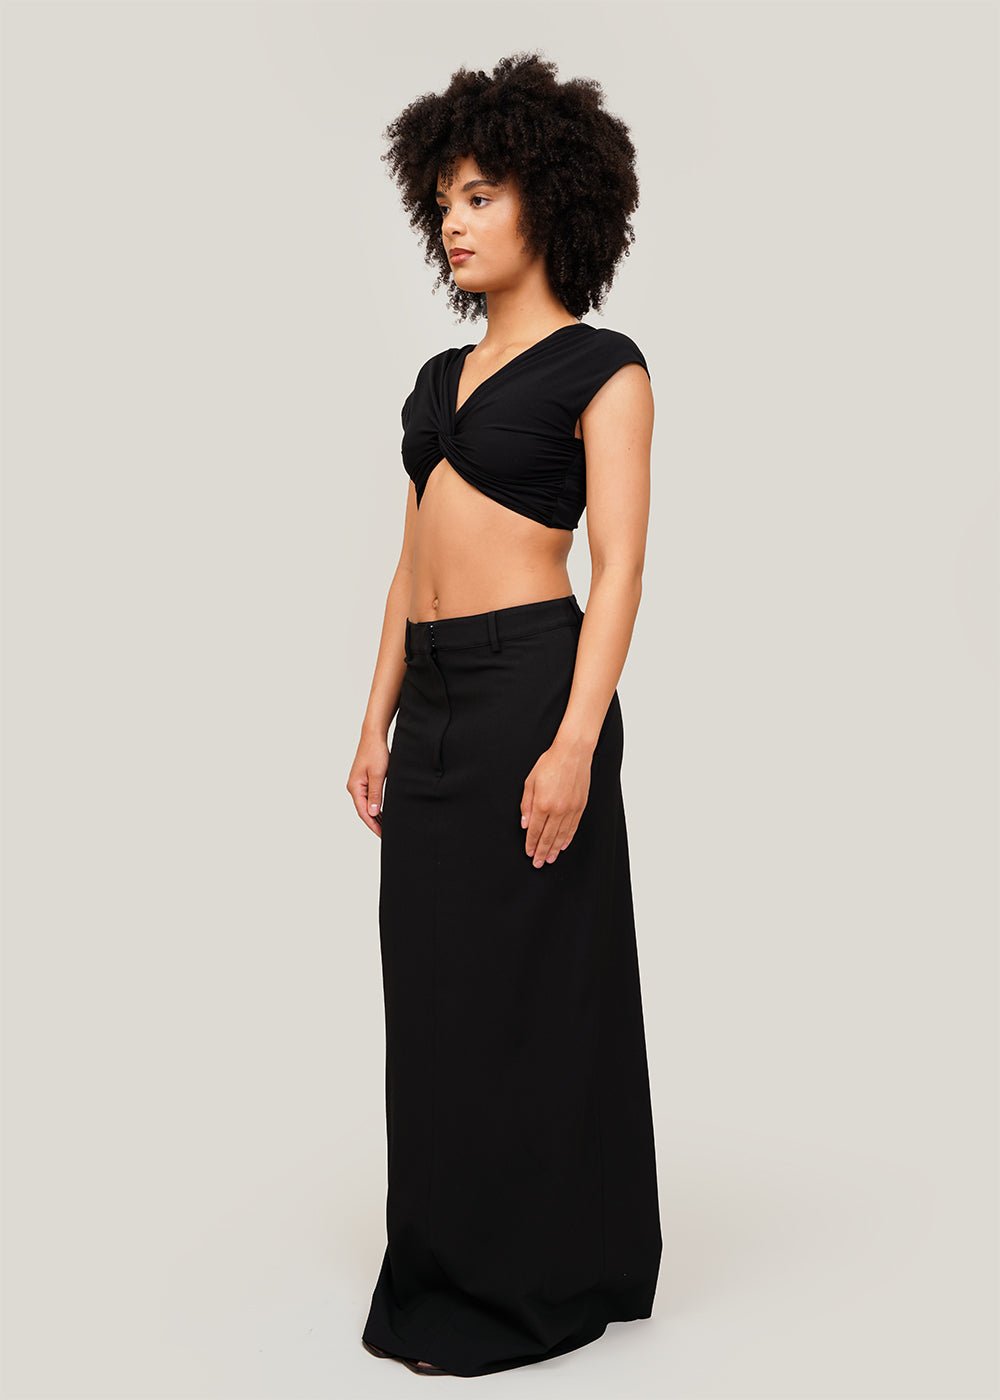 Beaufille Crosby Crop Top - New Classics Studios Sustainable Ethical Fashion Canada